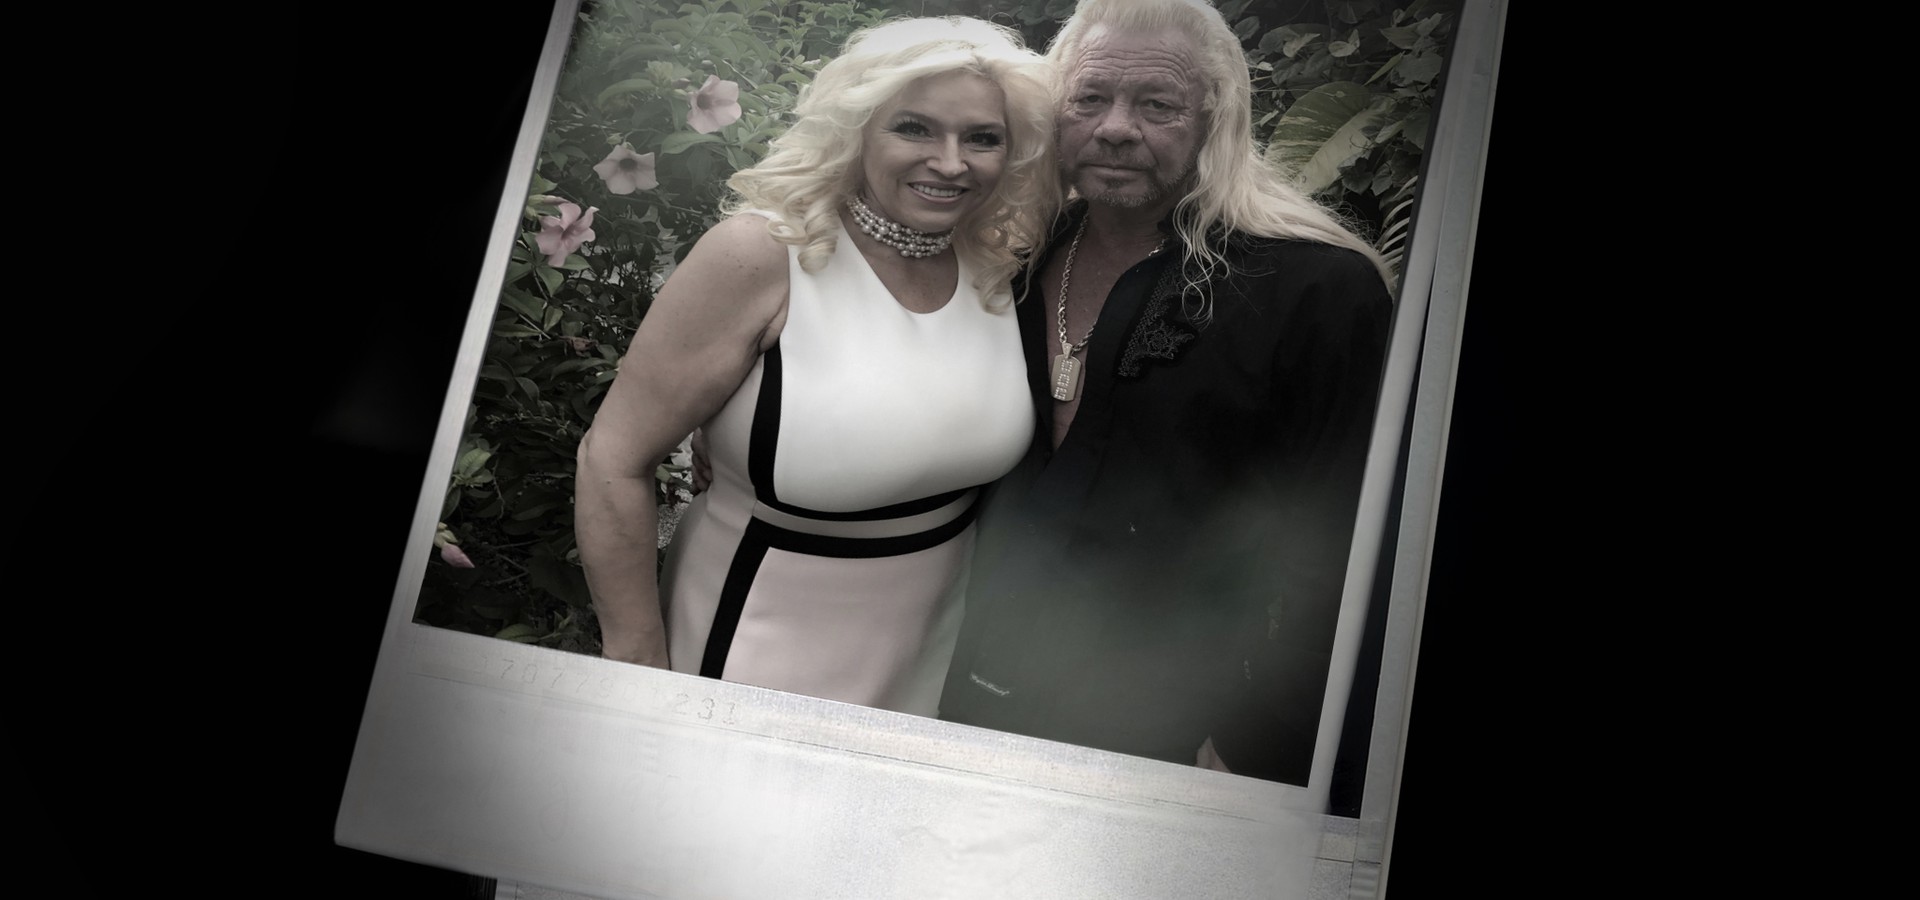 Dog and beth the fight of their lives watch online Dog Beth Fight Of Their Lives Streaming Online